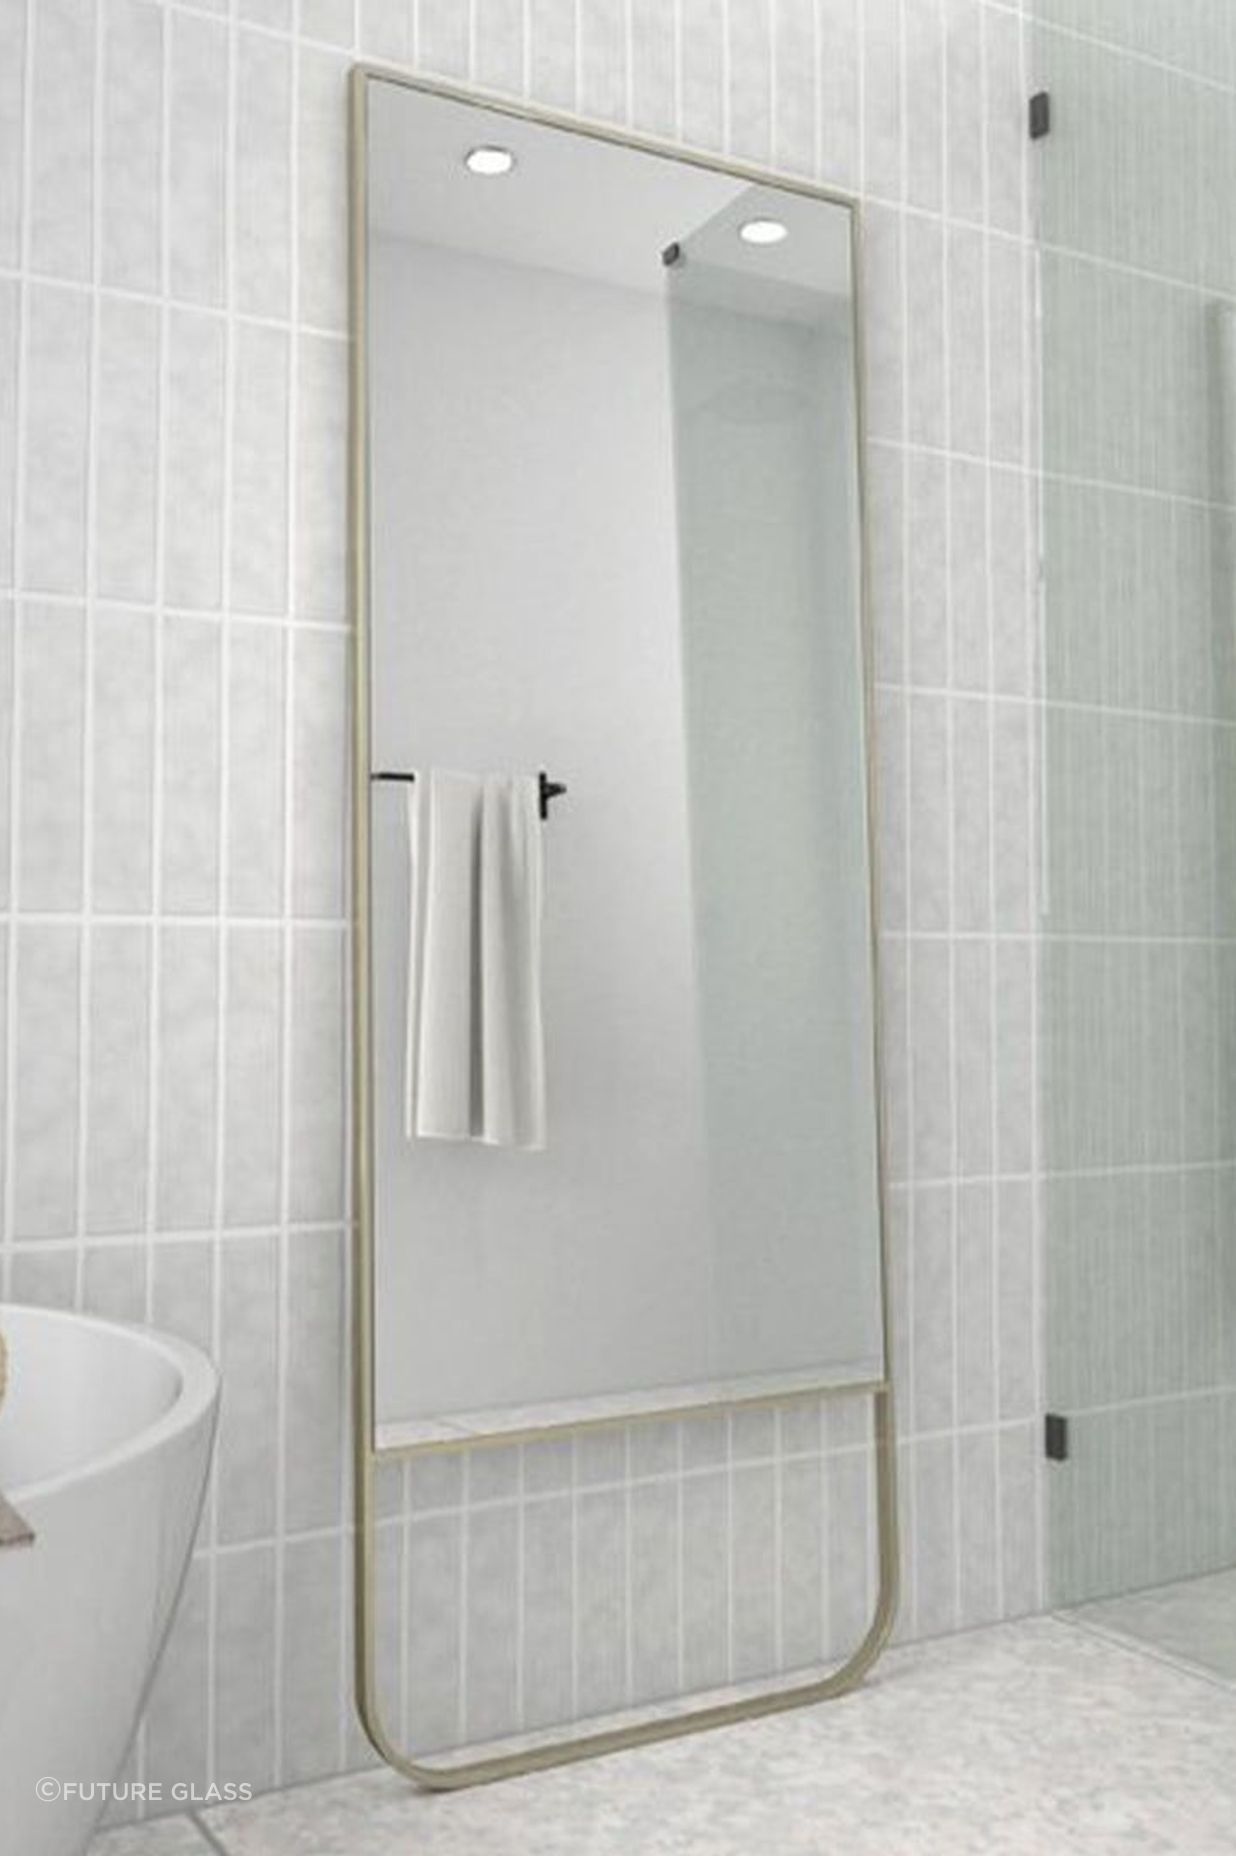 A full-length bathroom mirror adds depth and dimension to a bathroom. Featured product: Radius Leaner Framed Mirror.